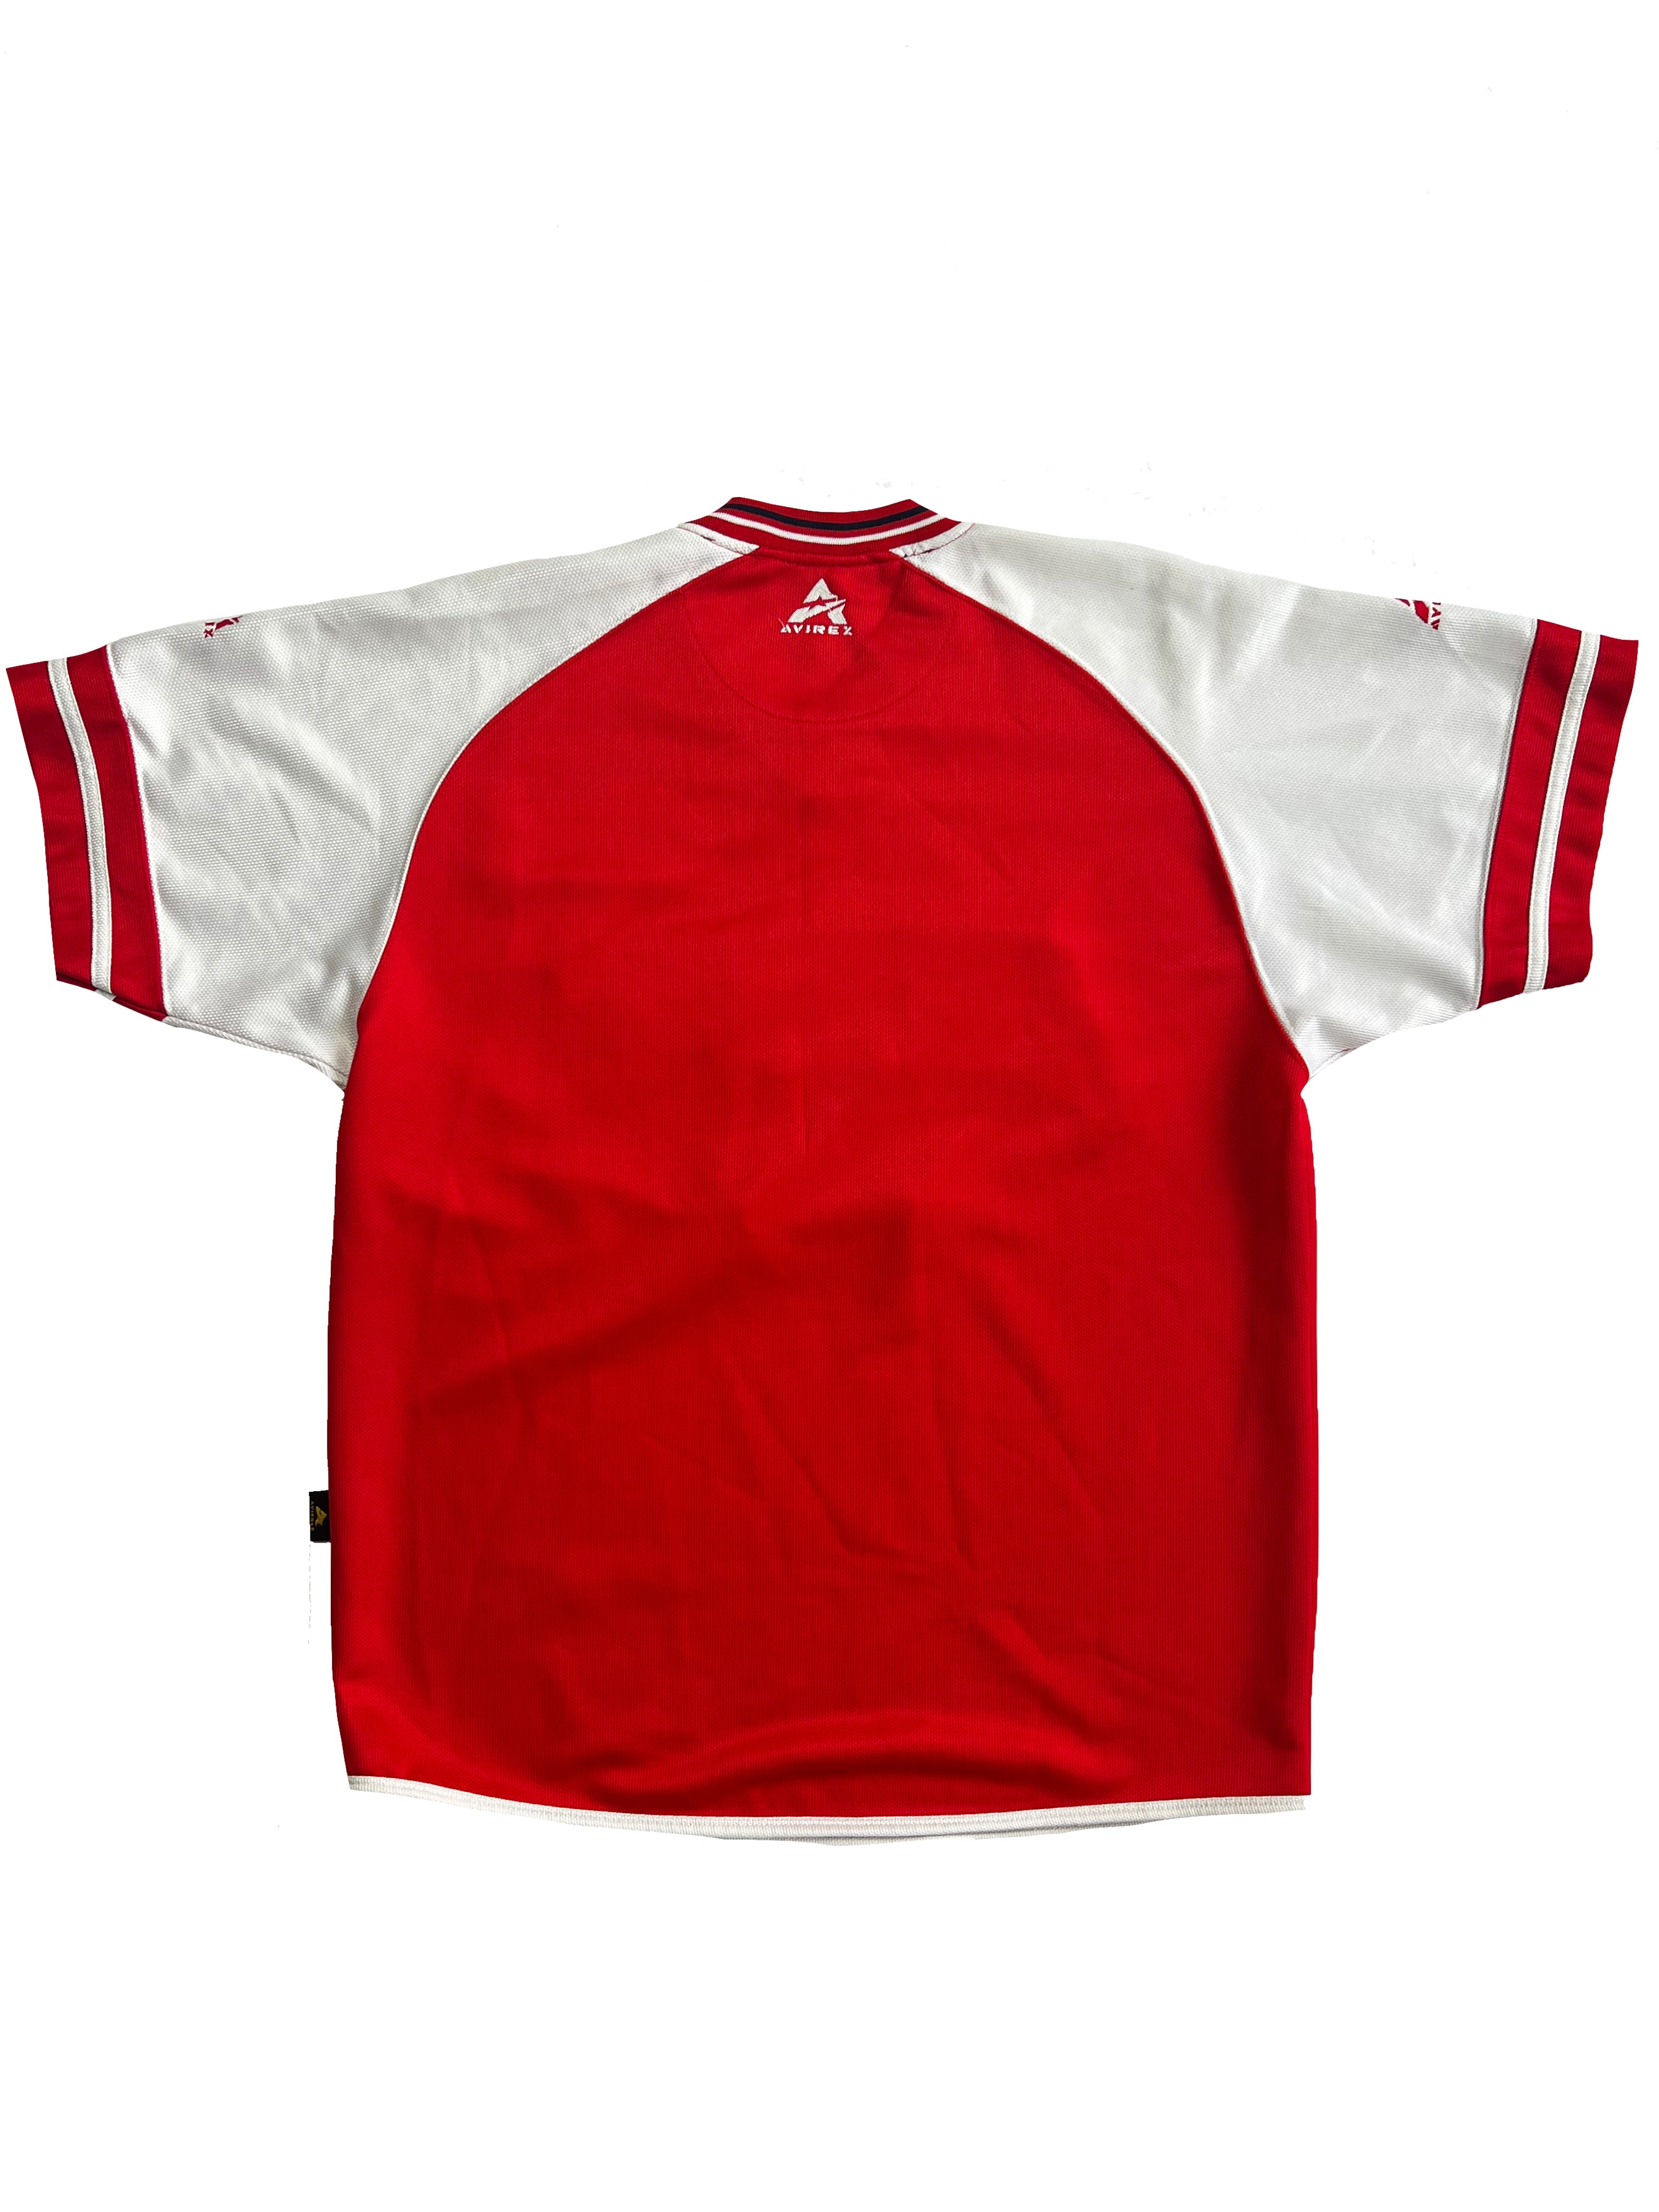 Avirex Red Spell Out Jersey 90's